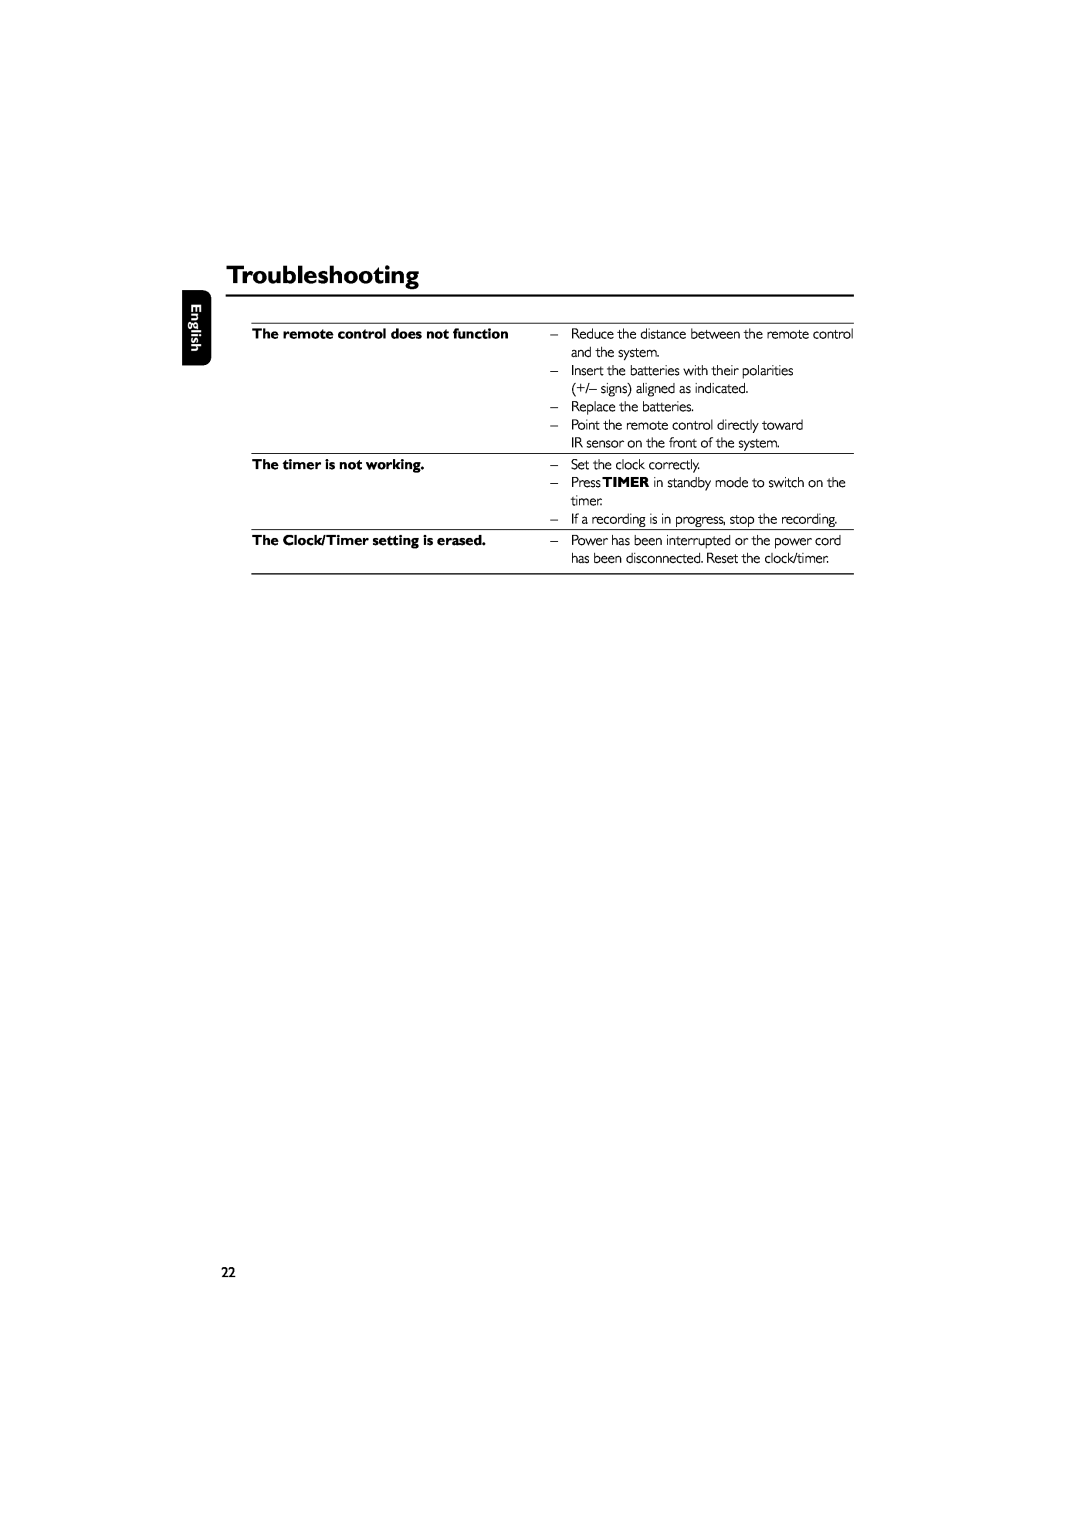 Philips FWM206 user manual Troubleshooting, English, The remote control does not function, The timer is not working 